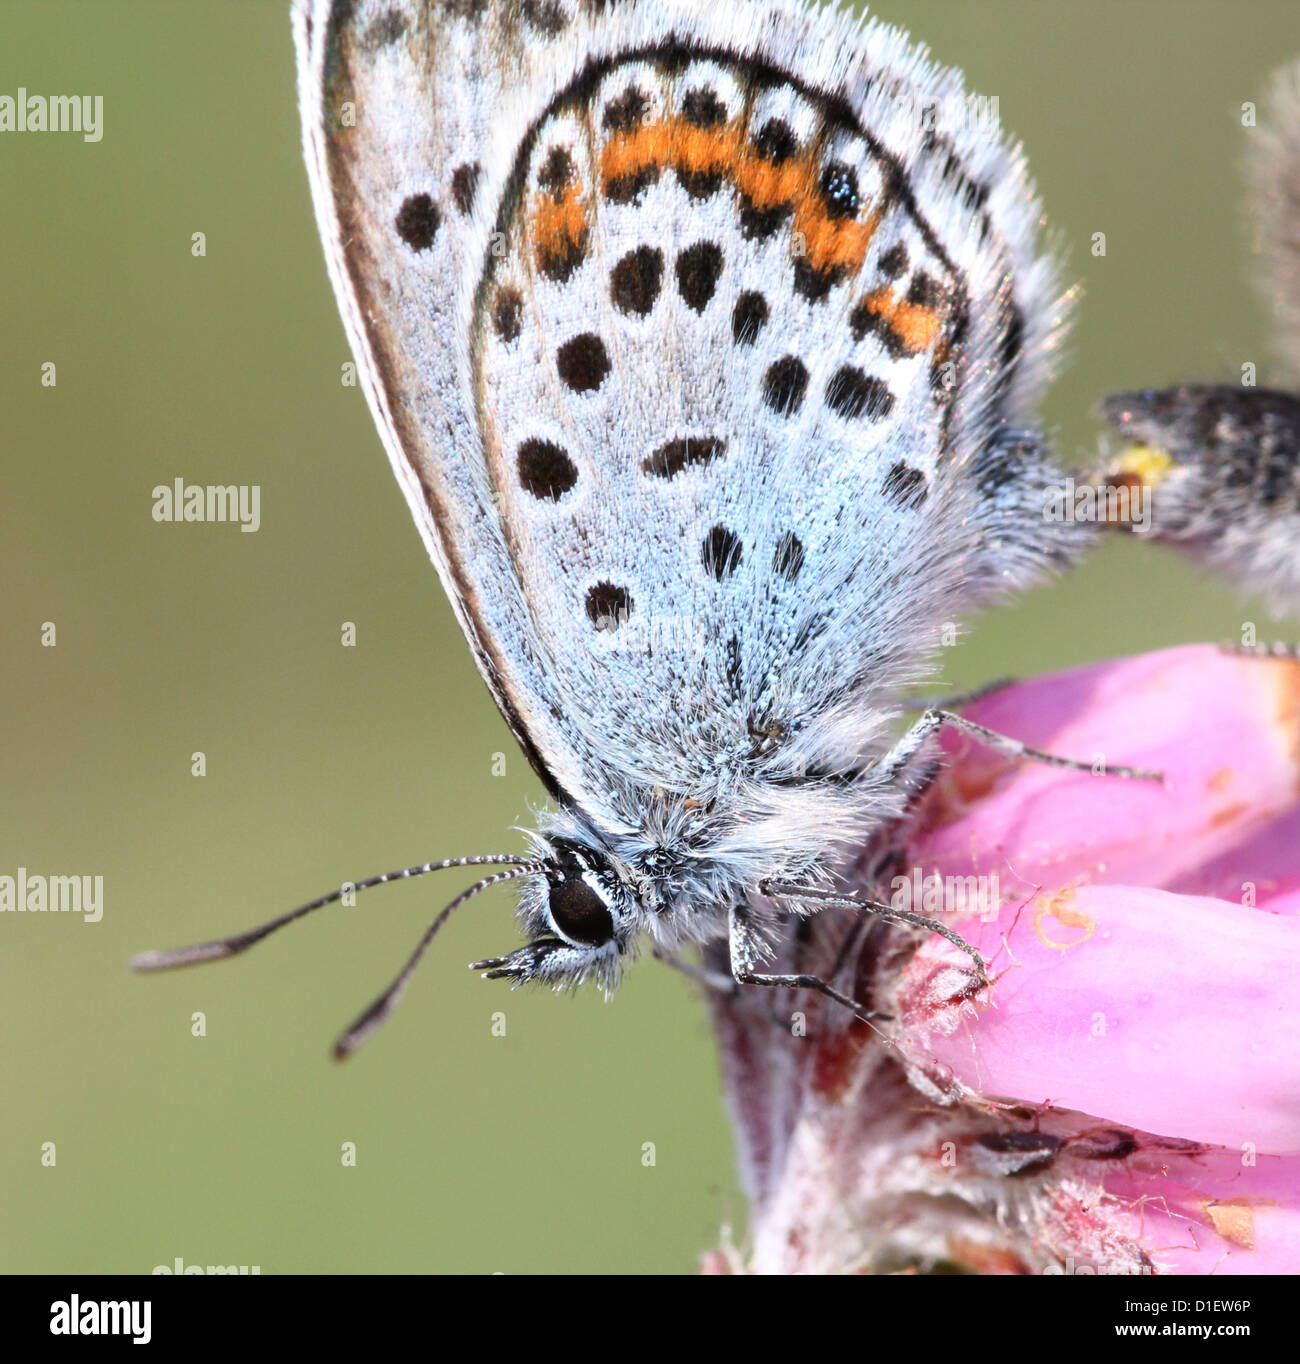 Extreme close-up of a male Silver-studded Blue butterfly (Plebejus argus) posing on  Erica tetralix (cross-leaved heath) Stock Photo